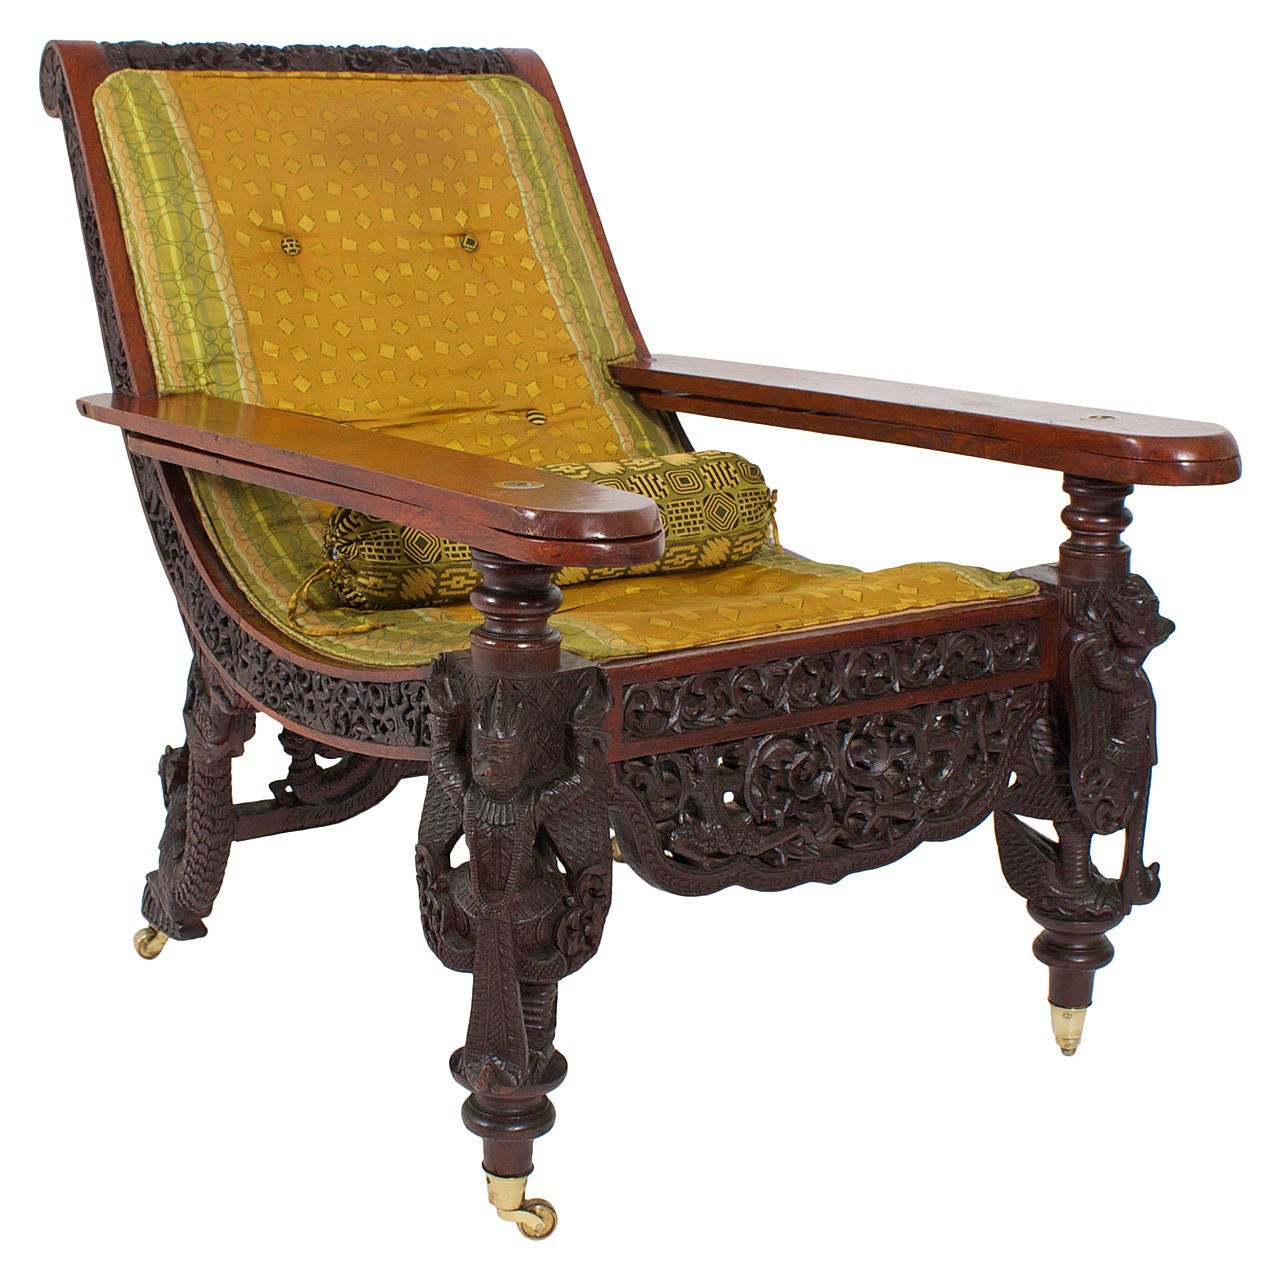 19th Century Anglo-Indian Carved Plantation or Planters Chair For Sale at 1stdibs